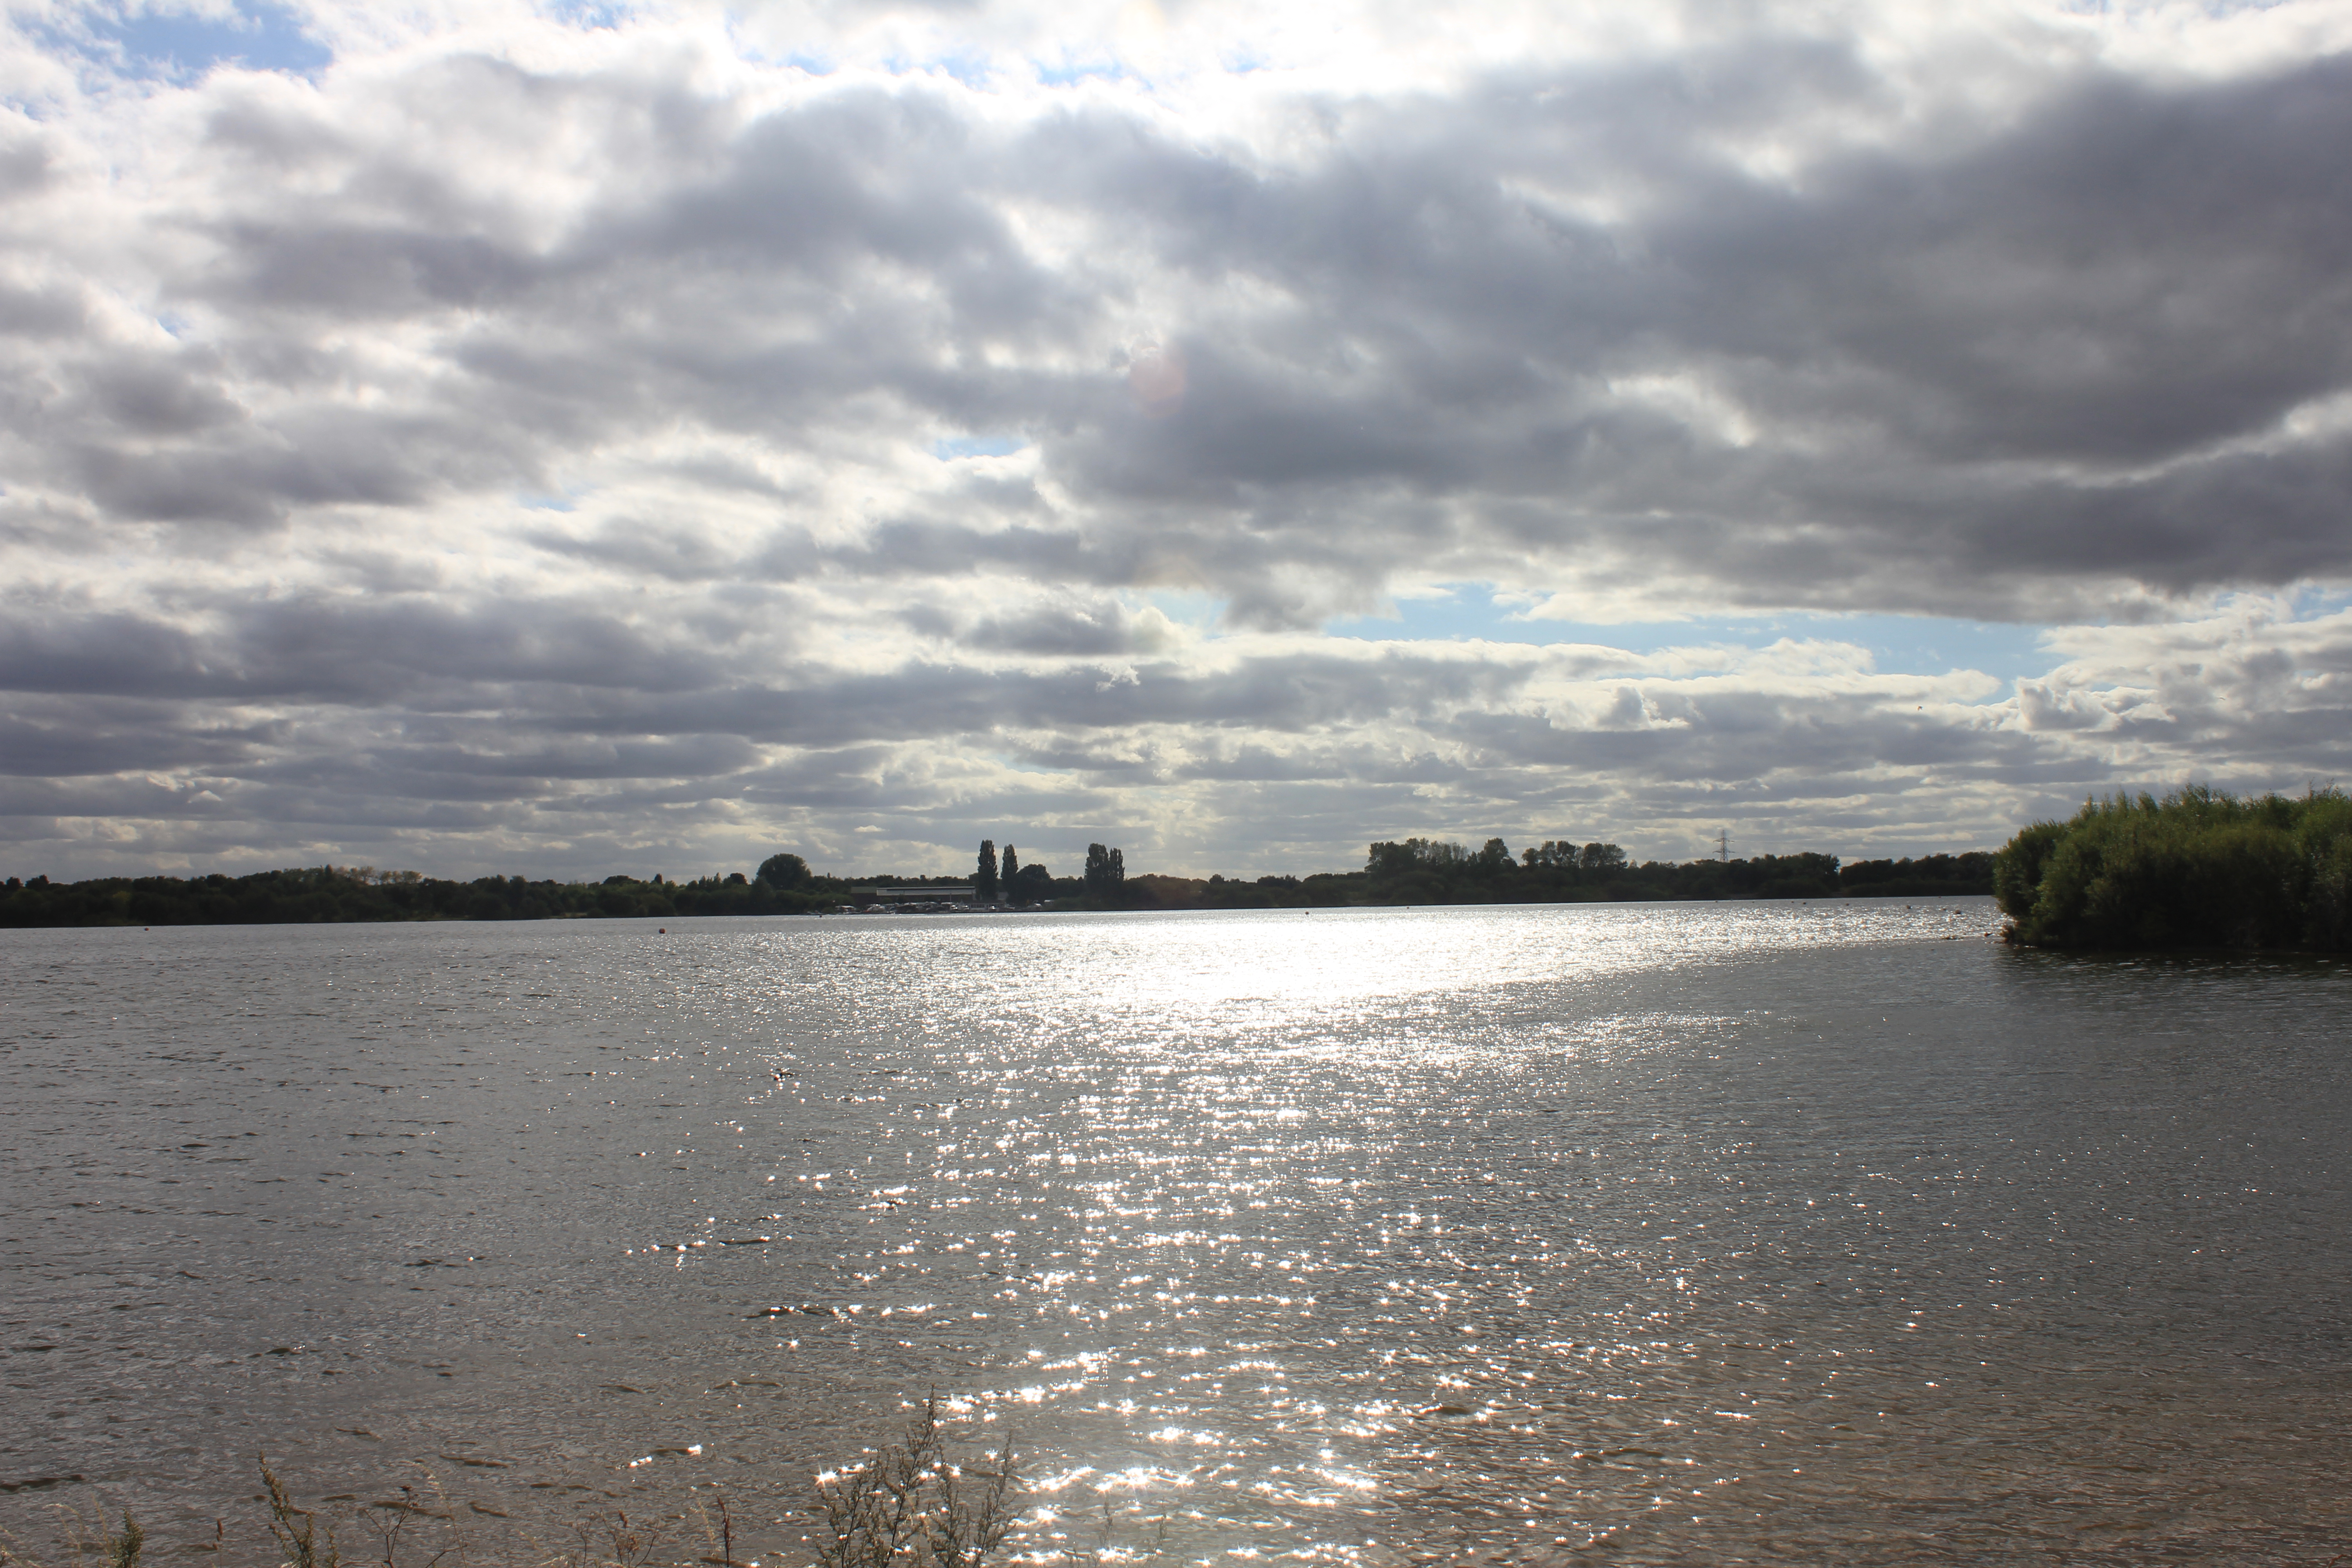 A picture of Chasewater where the Tormentil Mining Bee was rediscovered last year.